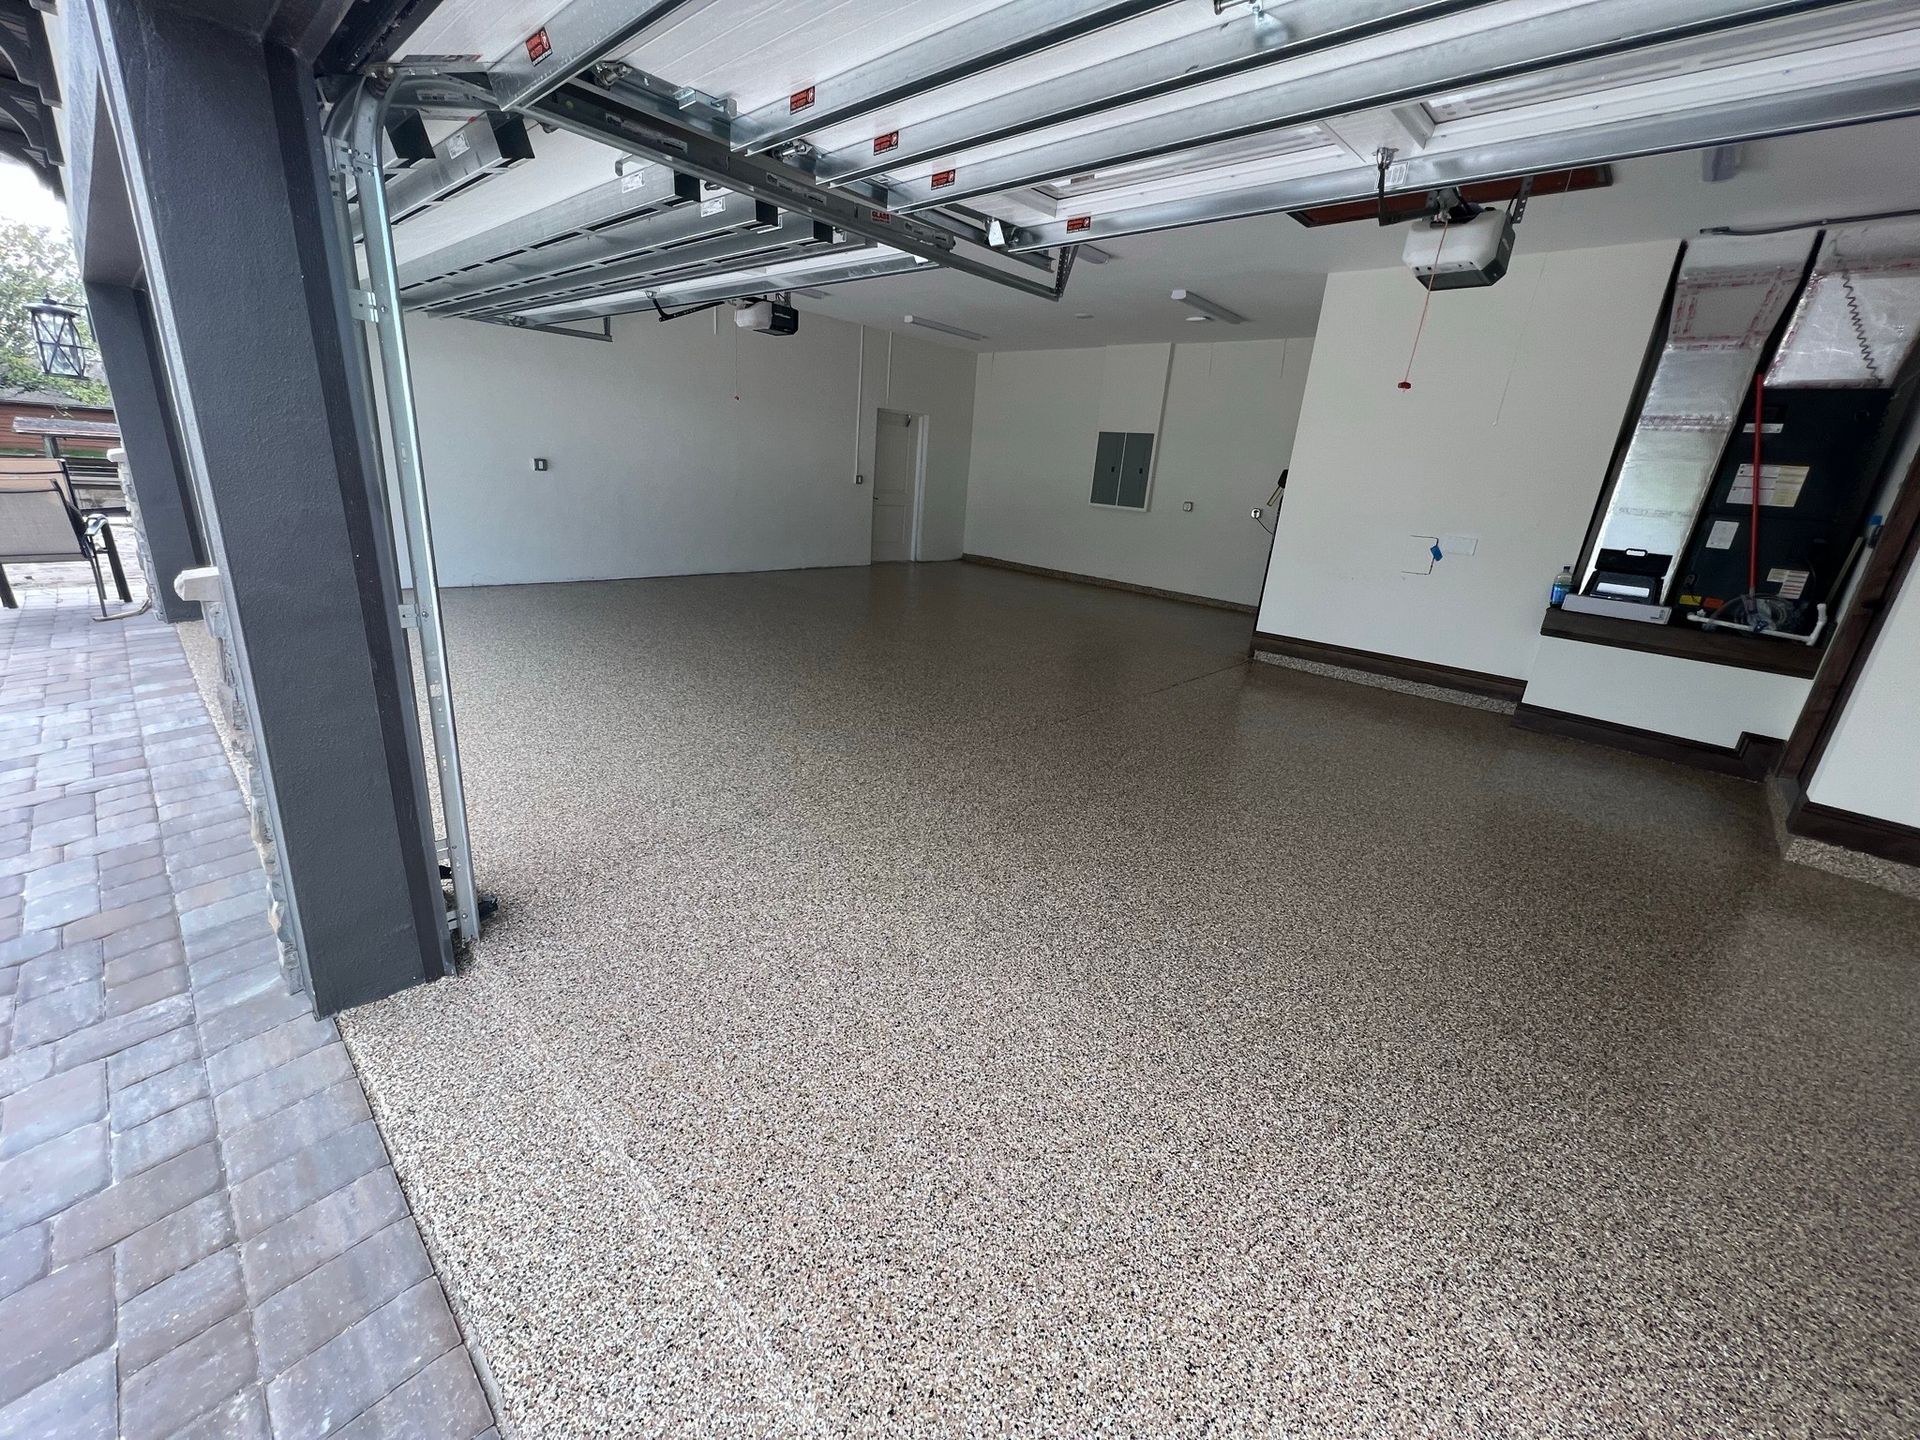 Residential Epoxy Flooring Services in Central Florida